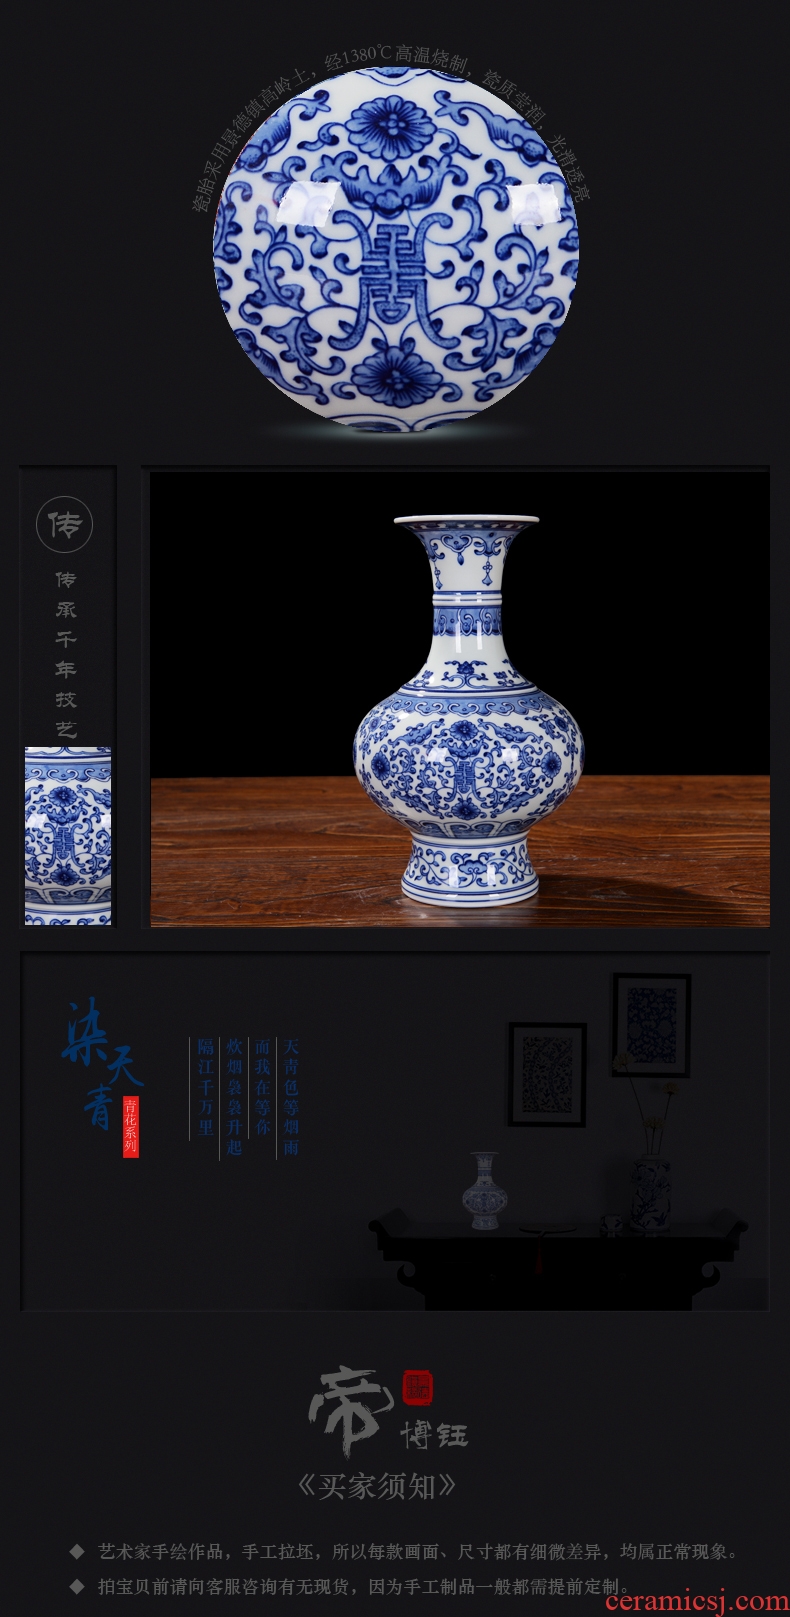 Jingdezhen ceramics vase antique blue-and-white bound lotus live a flat belly bottle decoration of the sitting room is placed